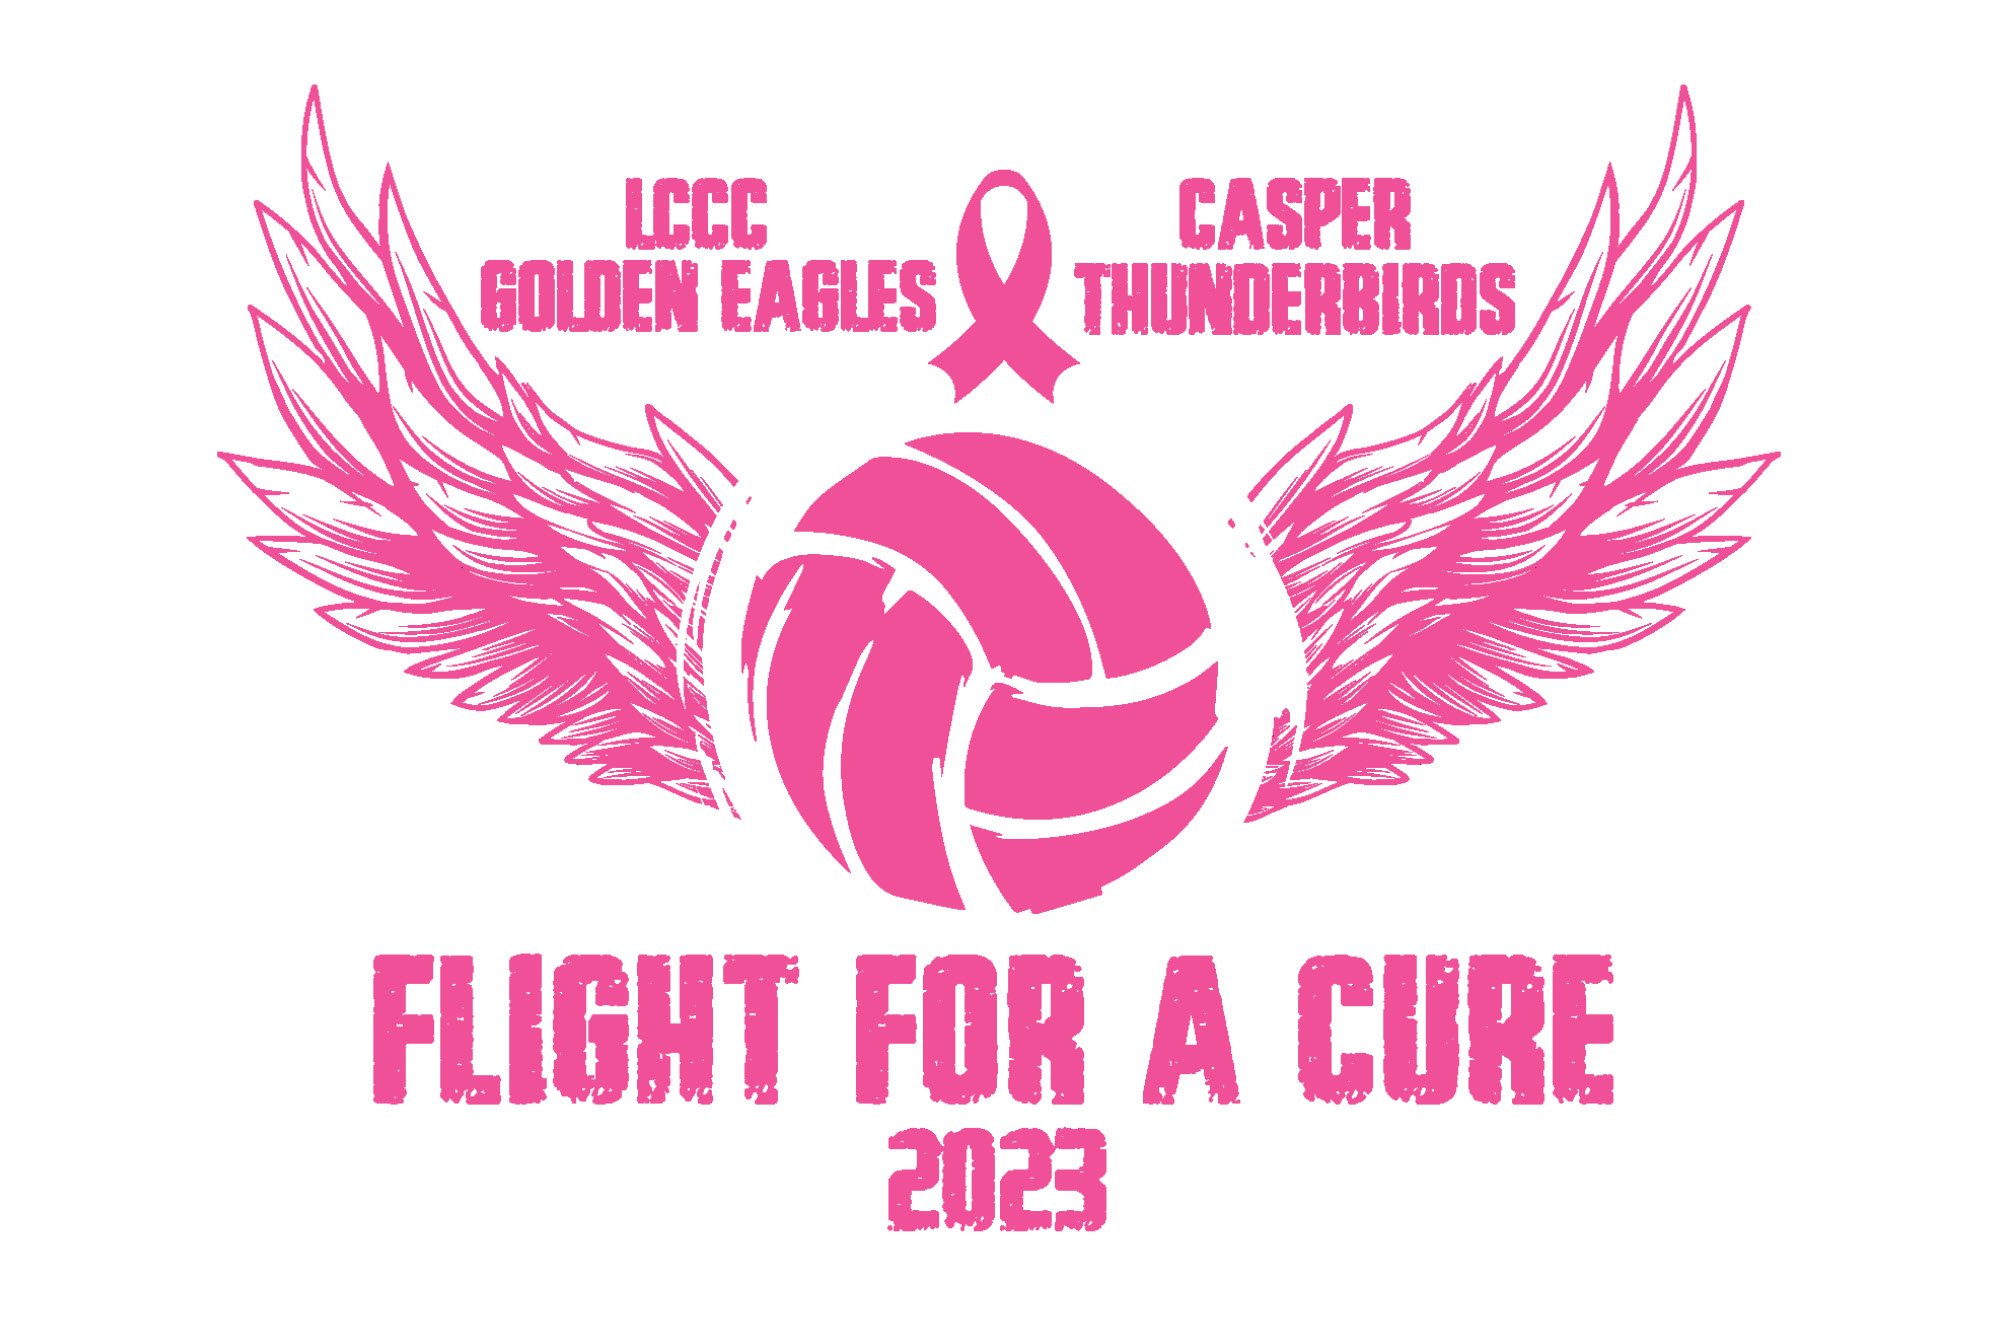 Image for "Flight for a Cure" press release.